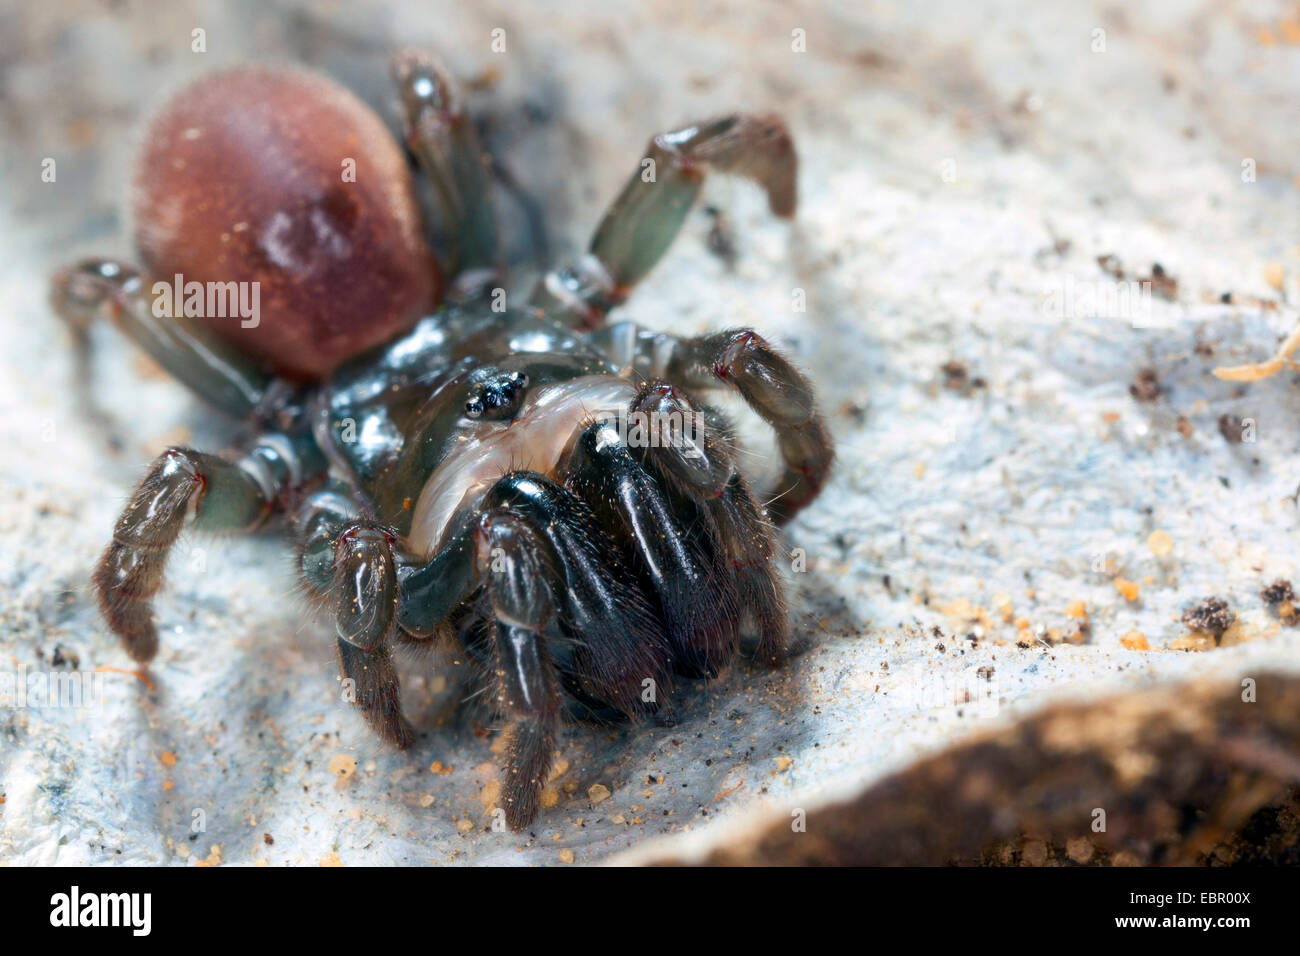 purse-web spider (Atypus affinis), on its web, Germany Stock Photo